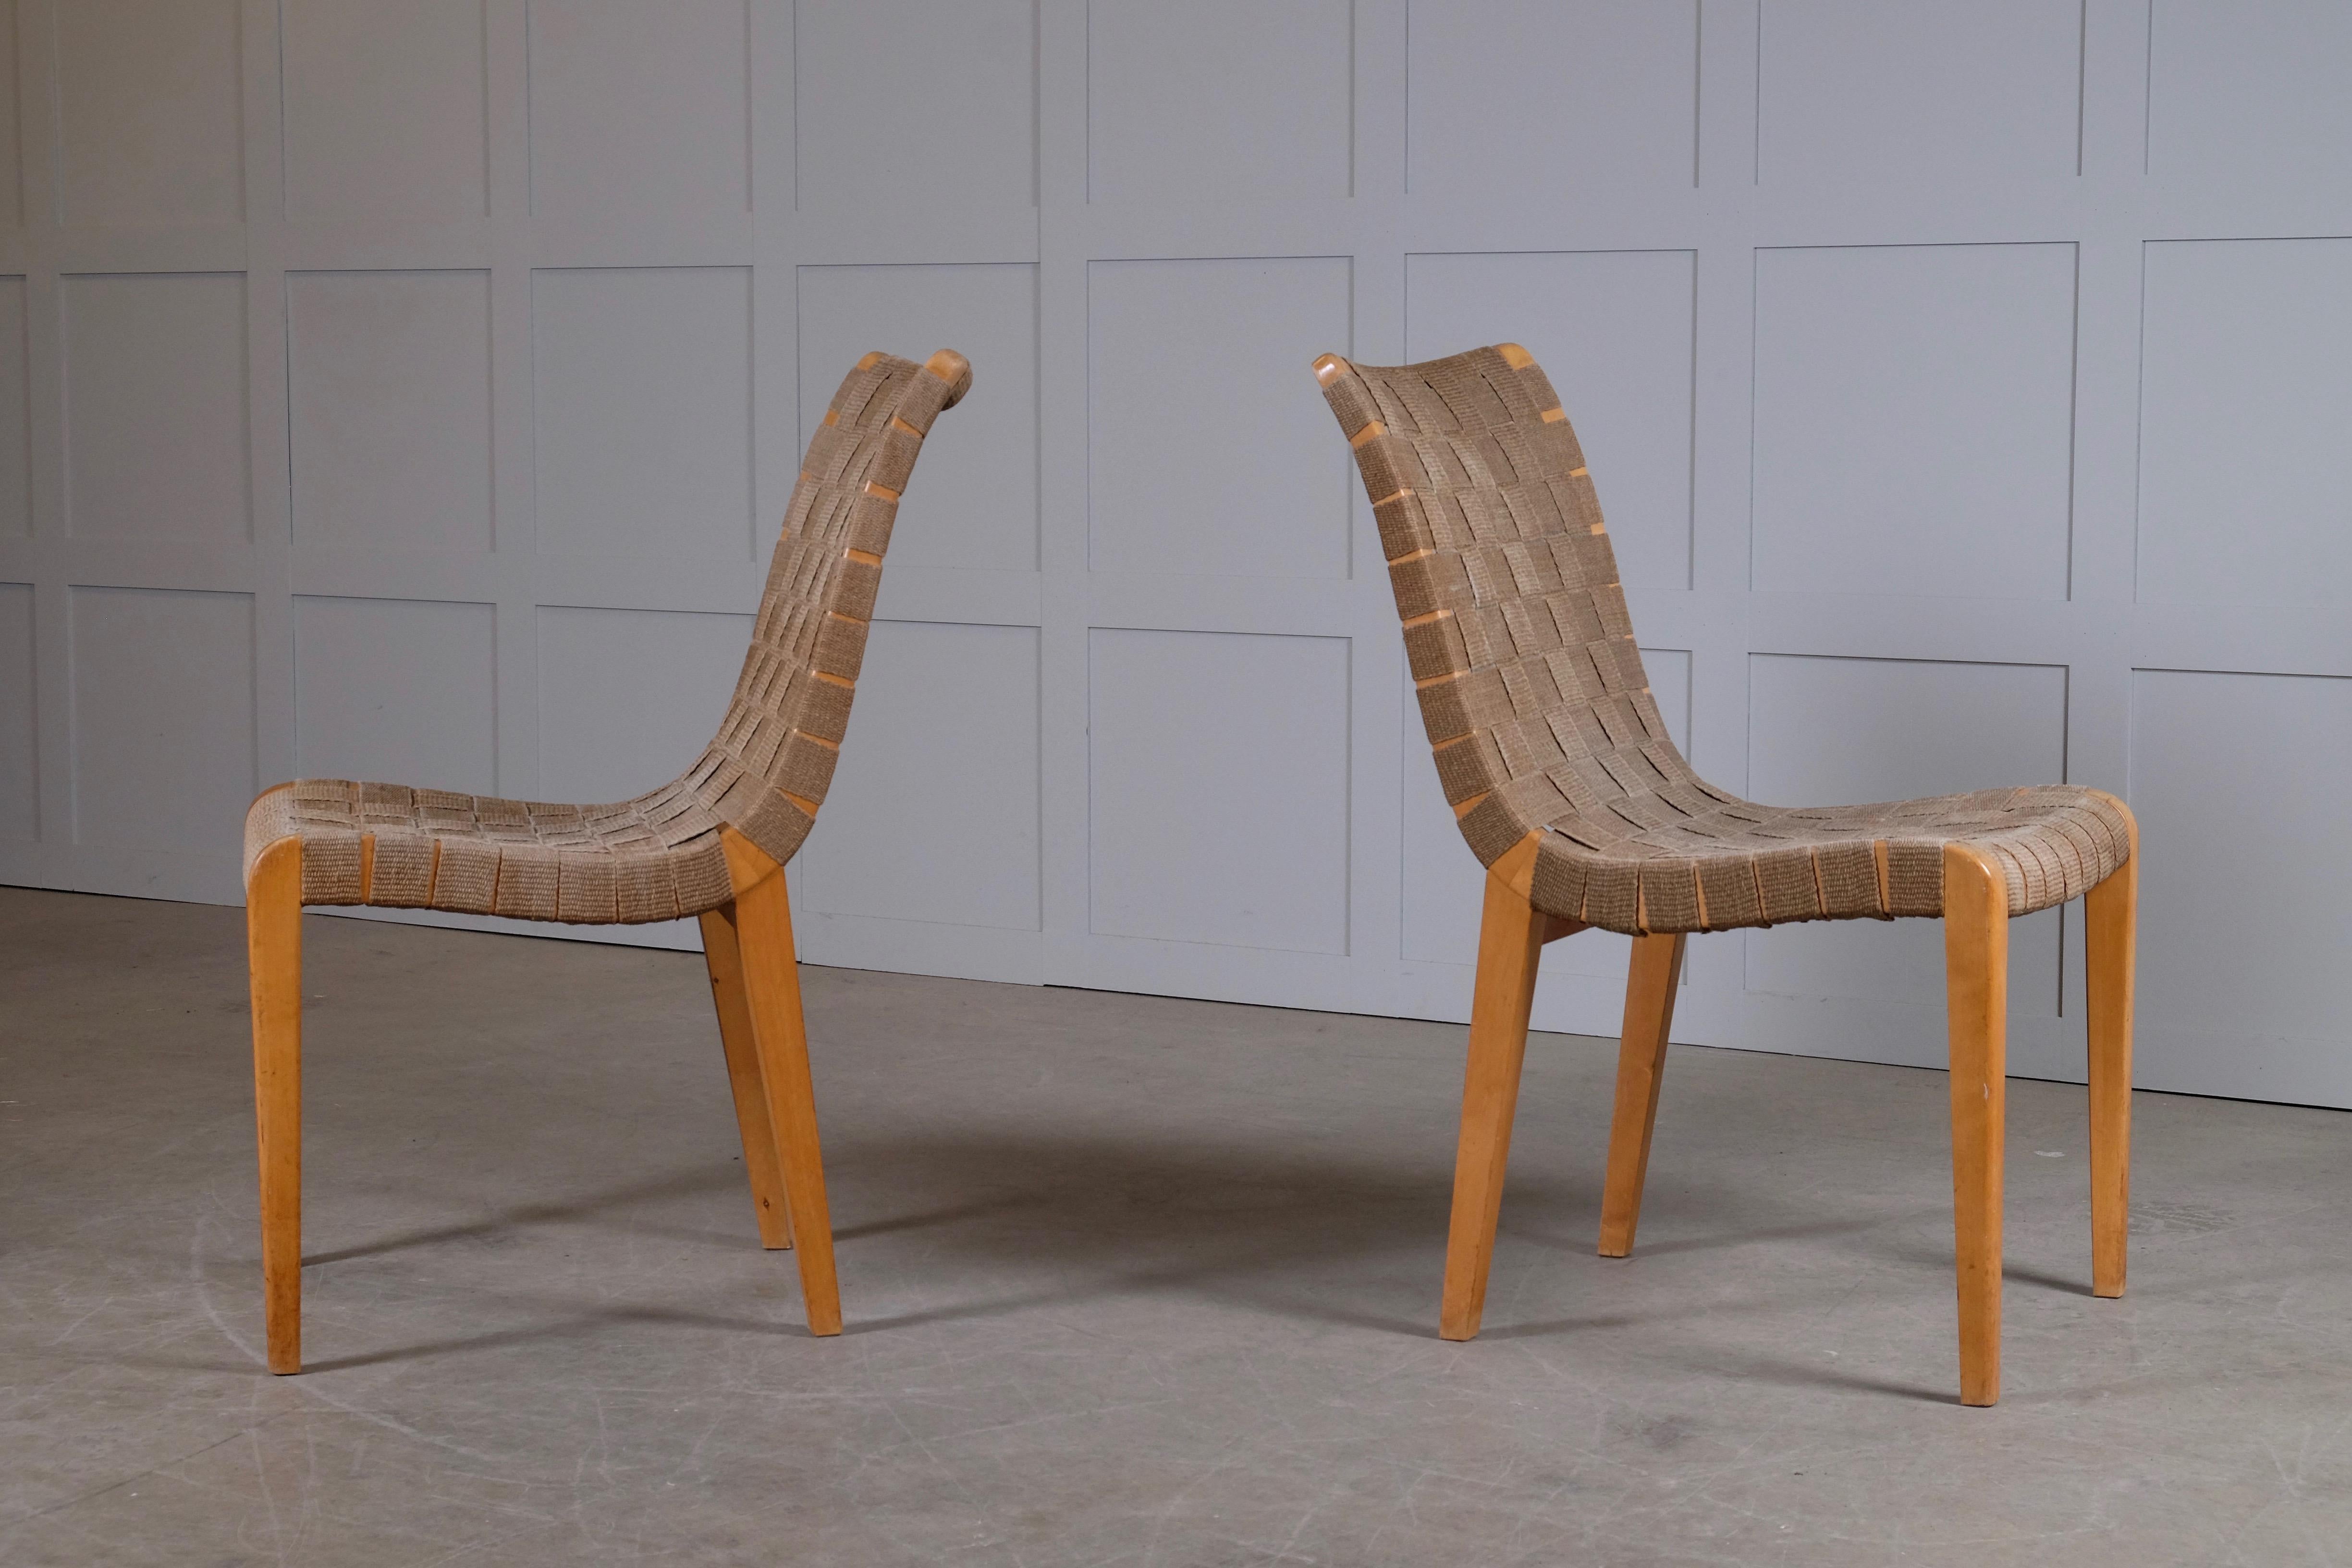 Scandinavian Modern Pair of Axel Larsson Chairs by Bodafors, 1940s For Sale